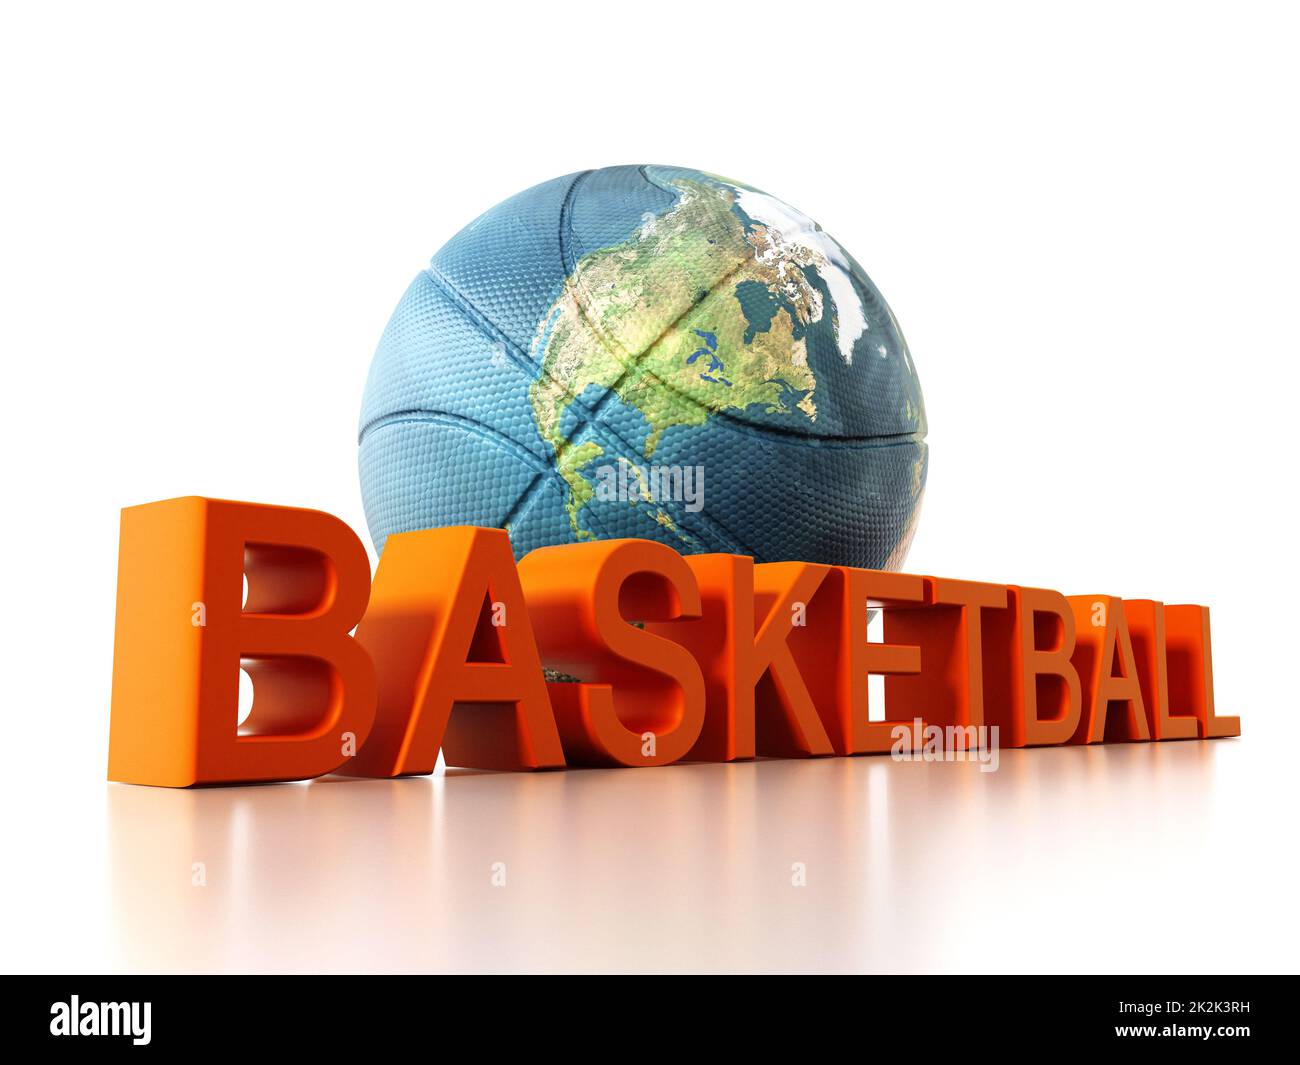 19,888 Yellow Basketball Images, Stock Photos, 3D objects, & Vectors